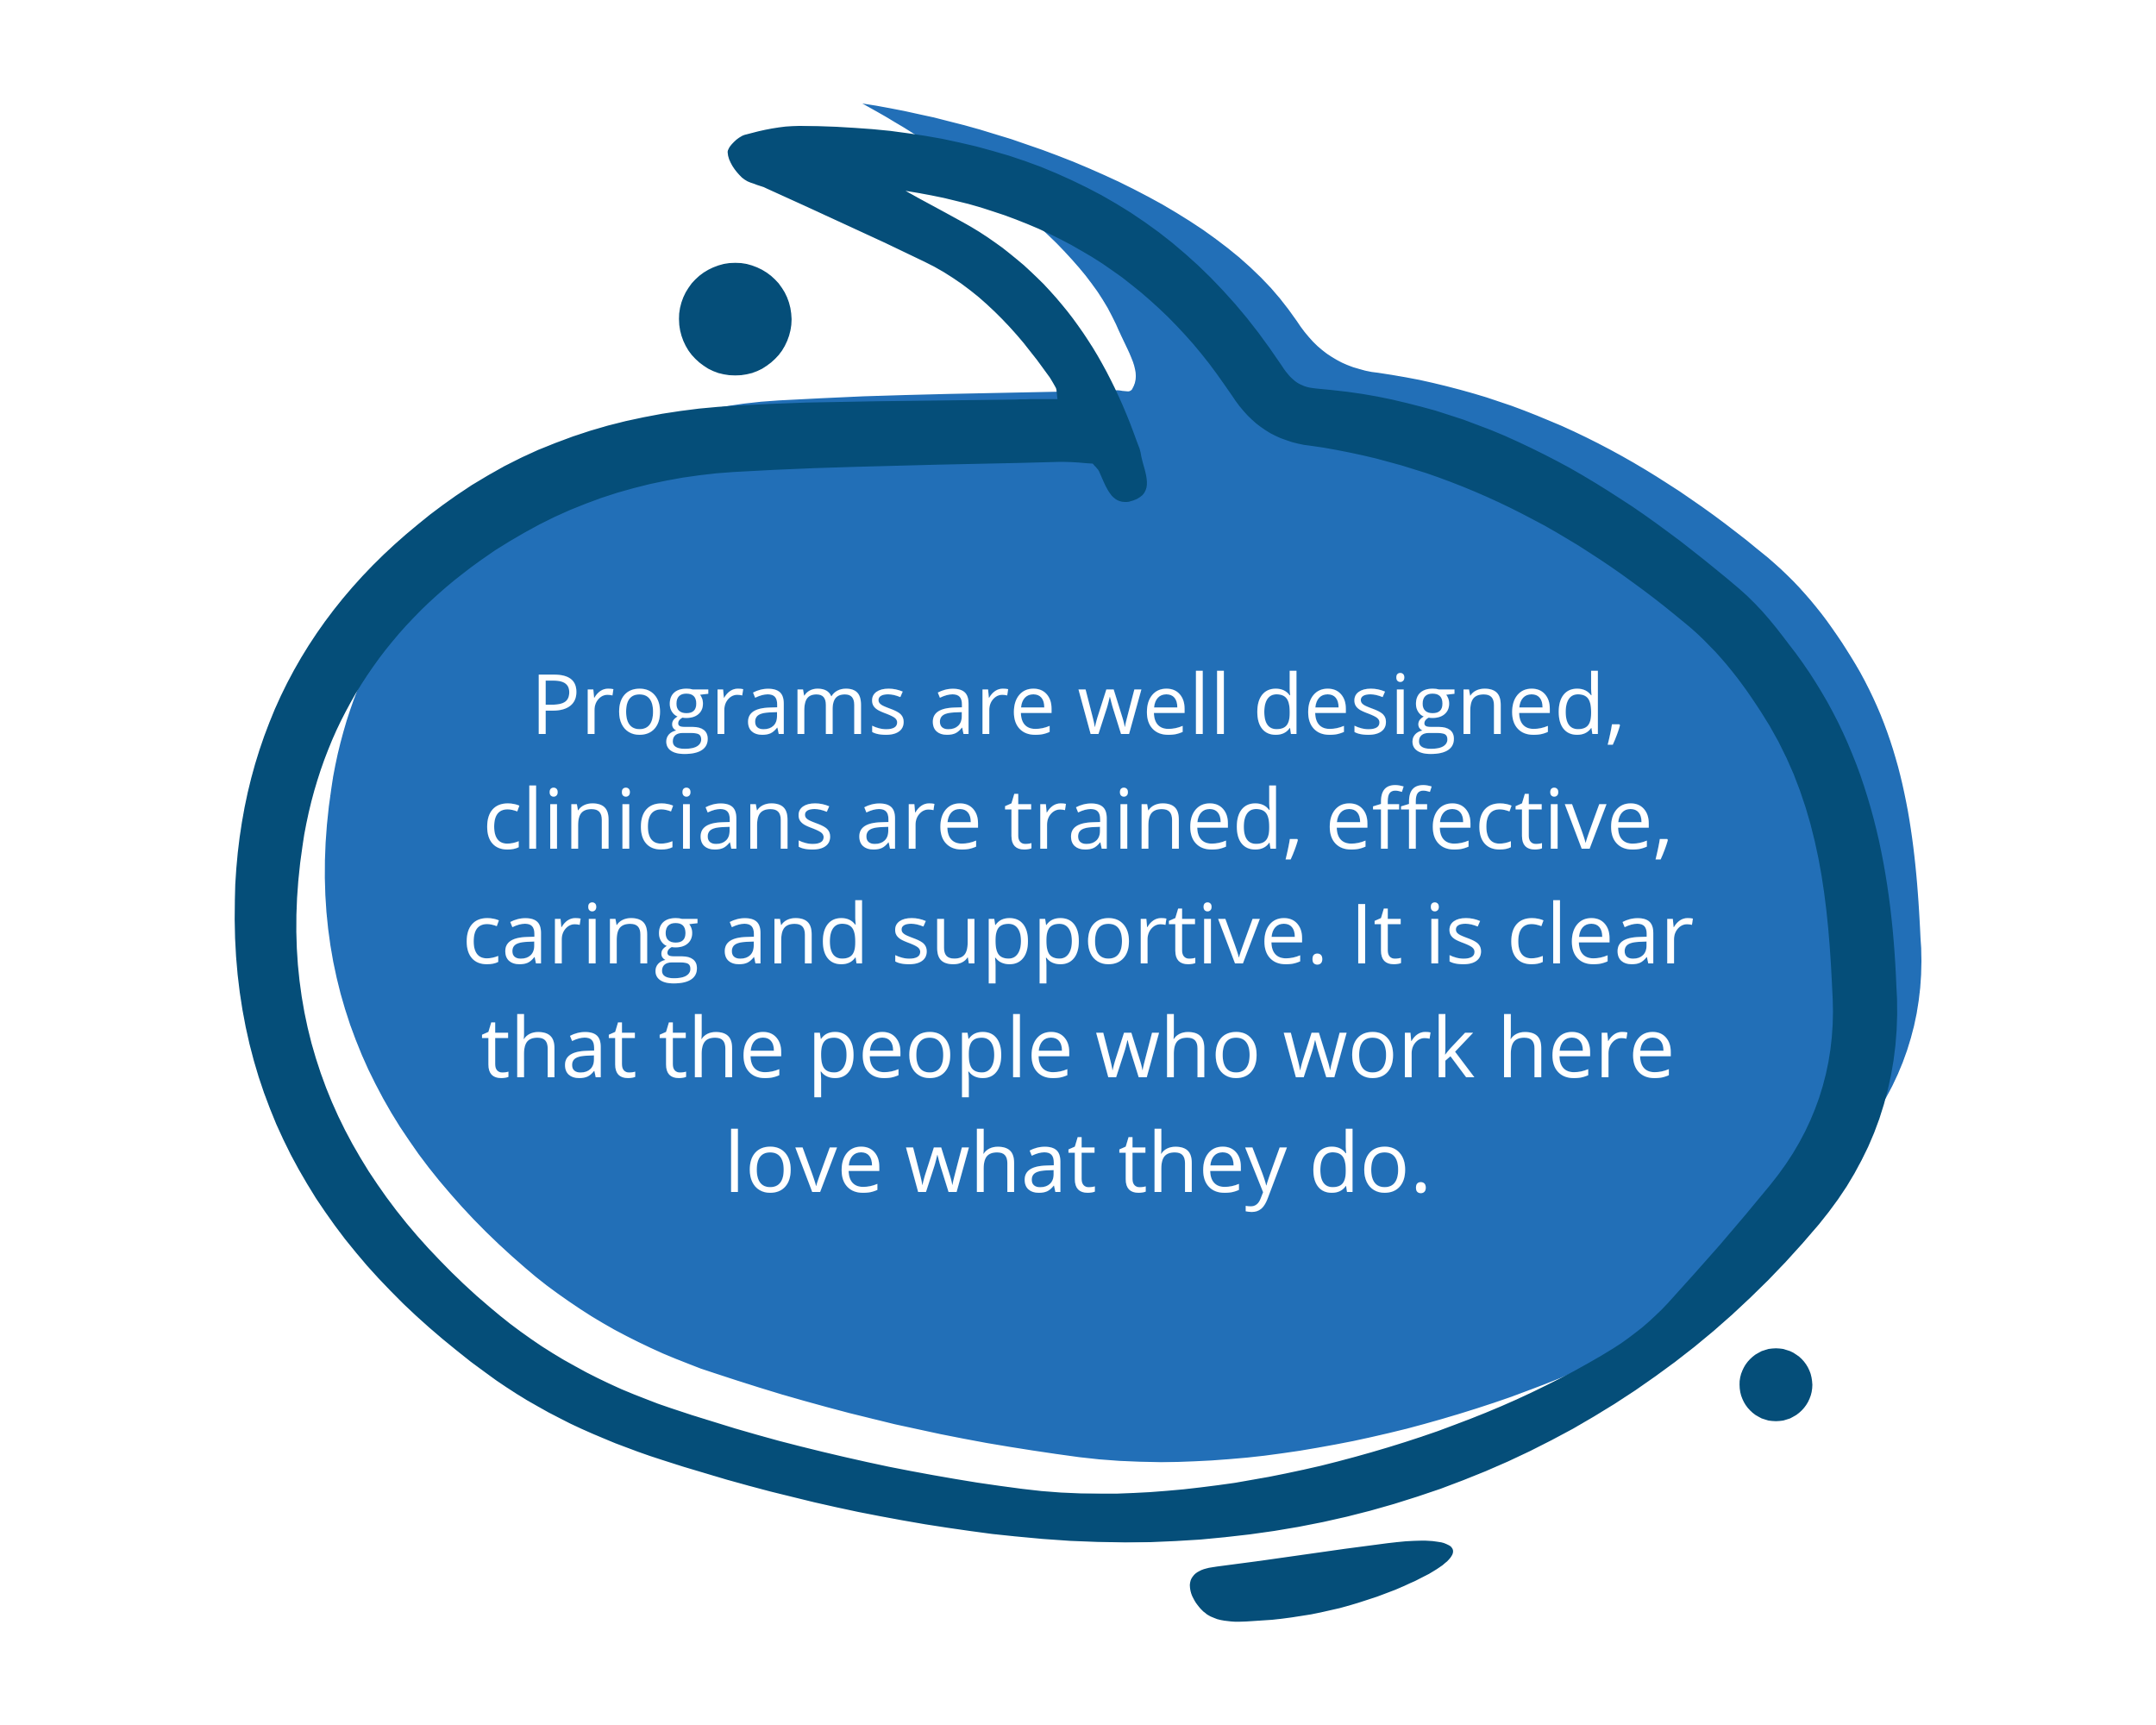    Programs are well designed, clinicians are trained, effective, caring and supportive. It is clear that the people who work here love what they do.   